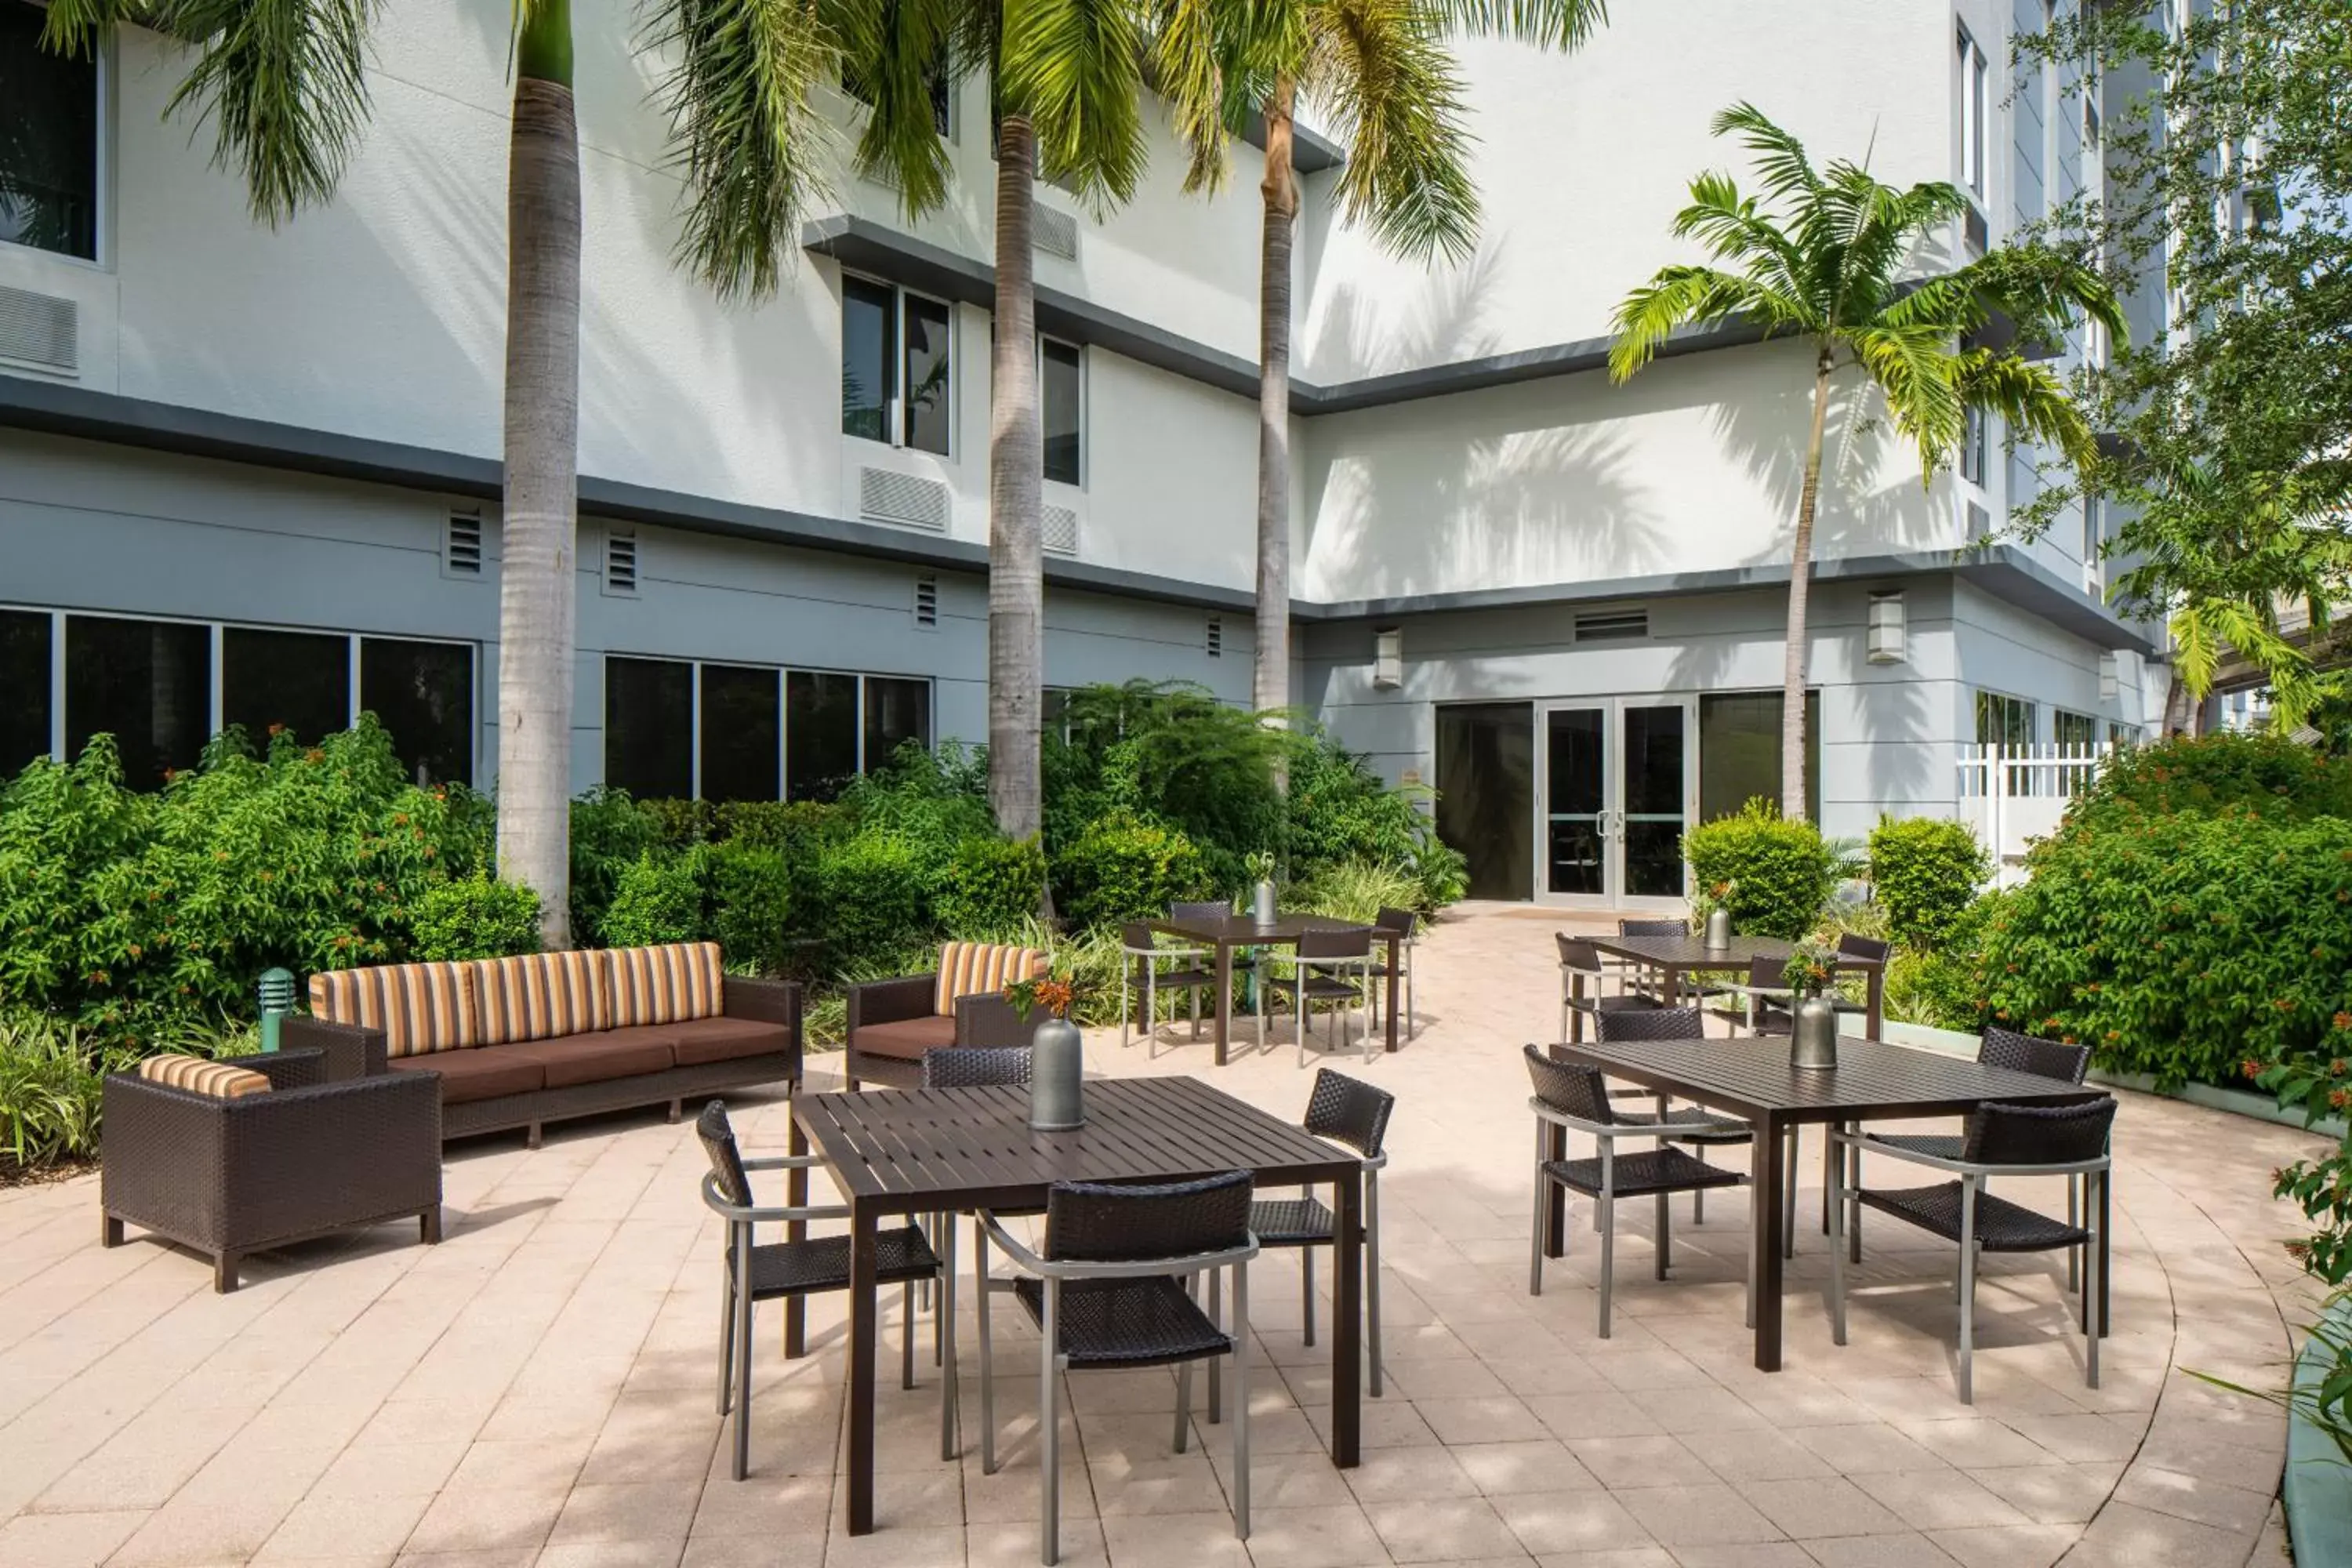 Property building in SpringHill Suites Miami Downtown/Medical Center